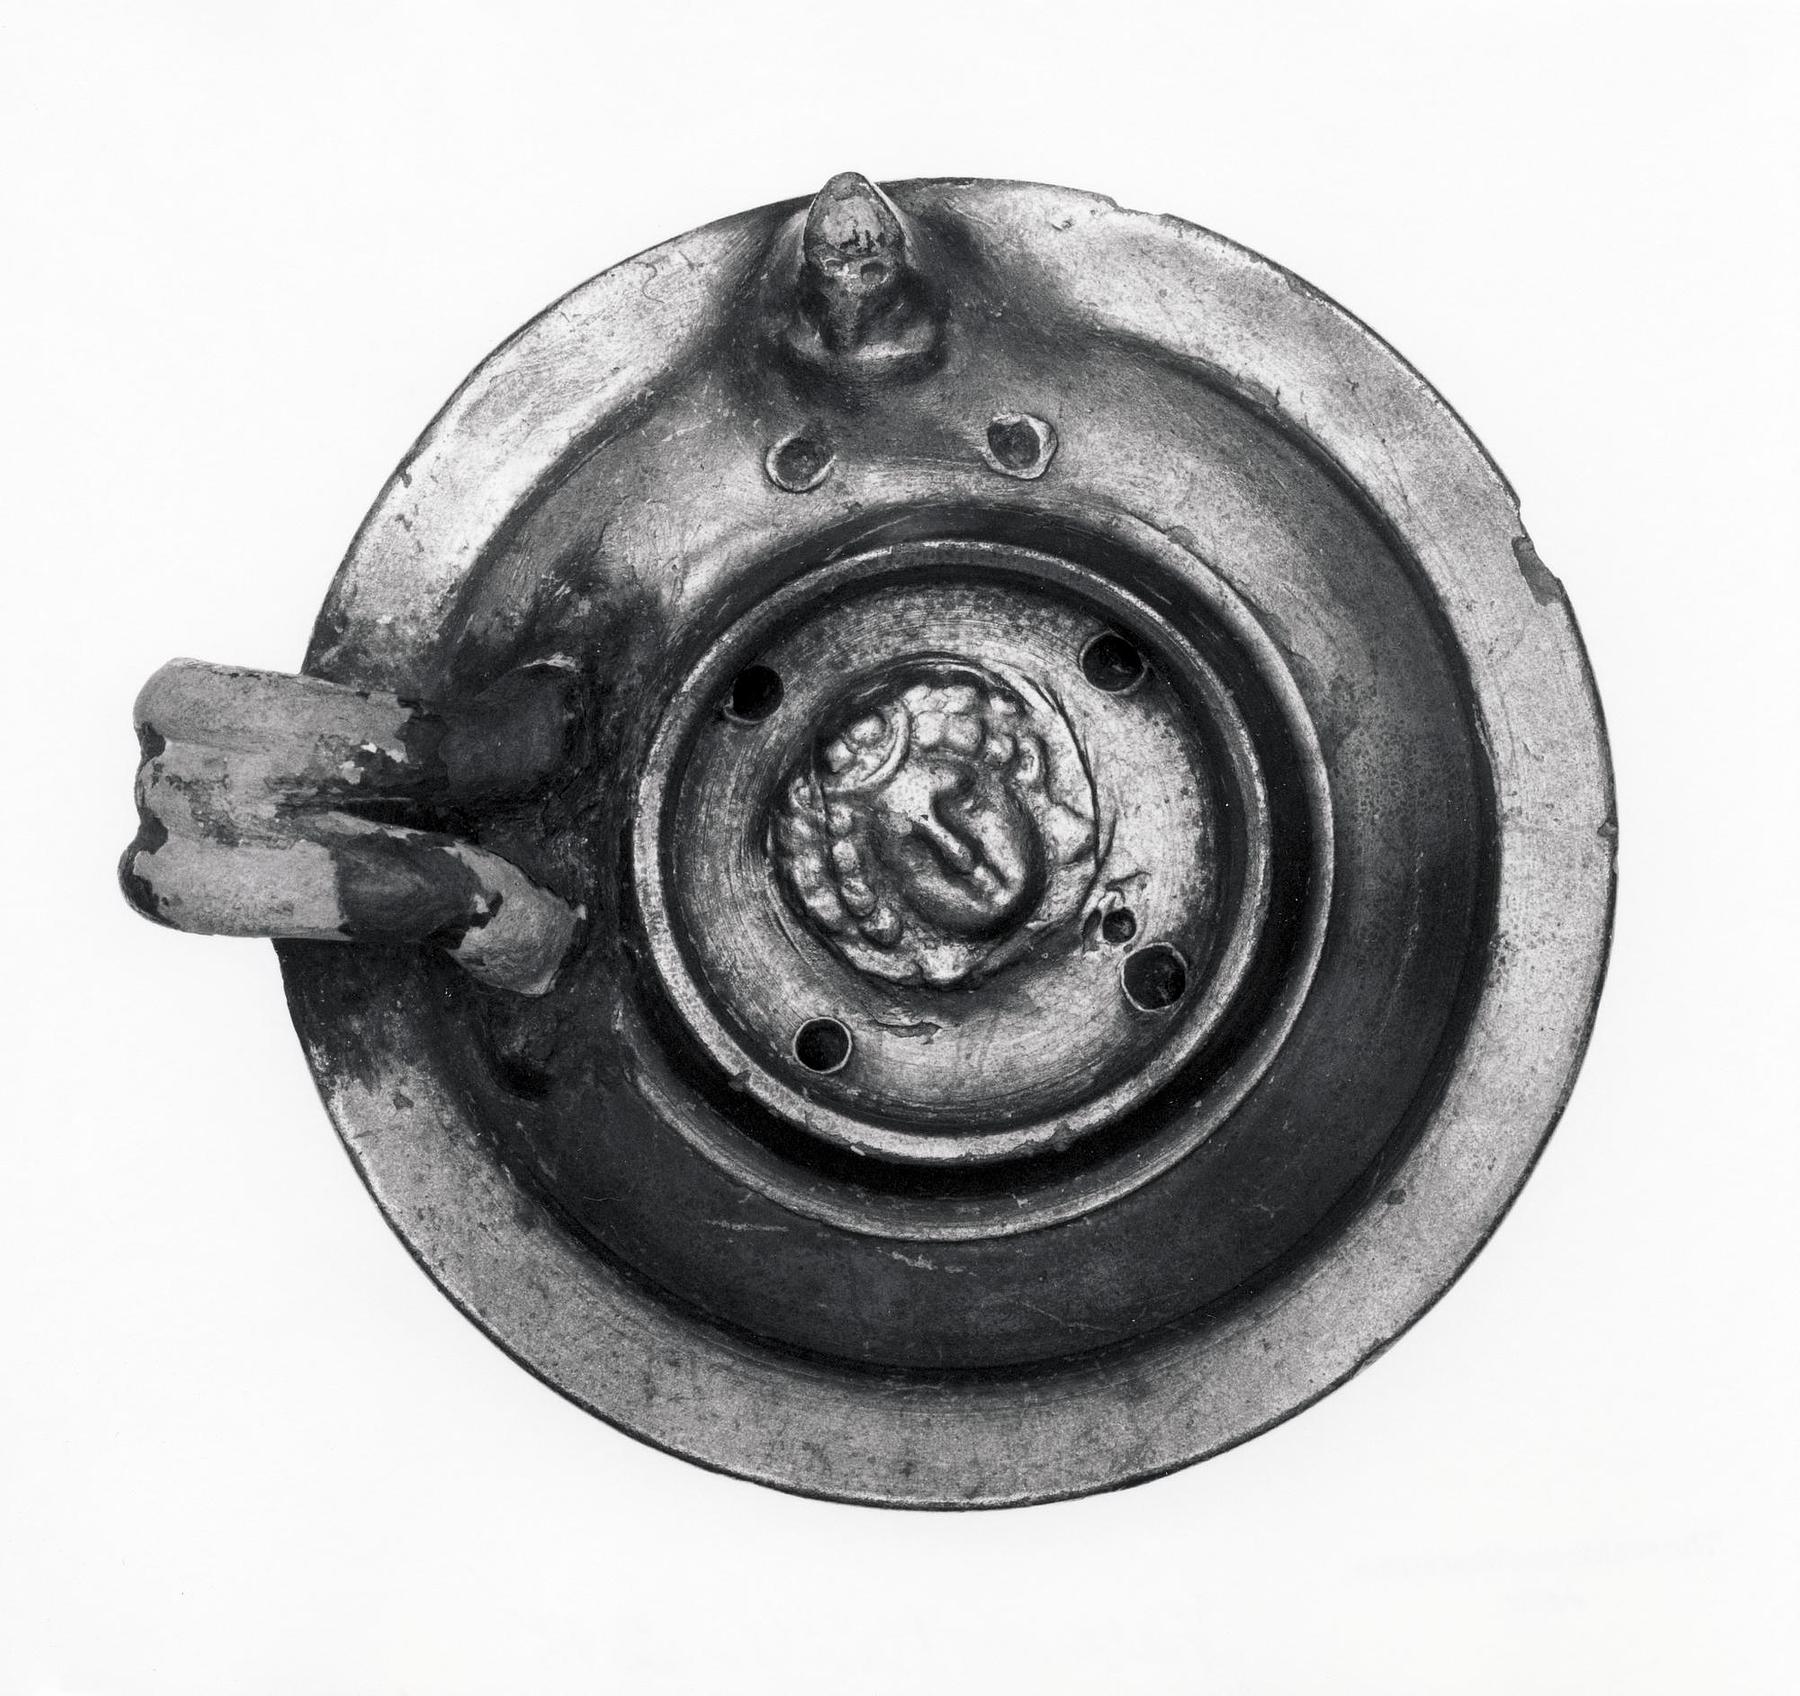 Guttus with a female head and spout in the shape of an animal's head, H778